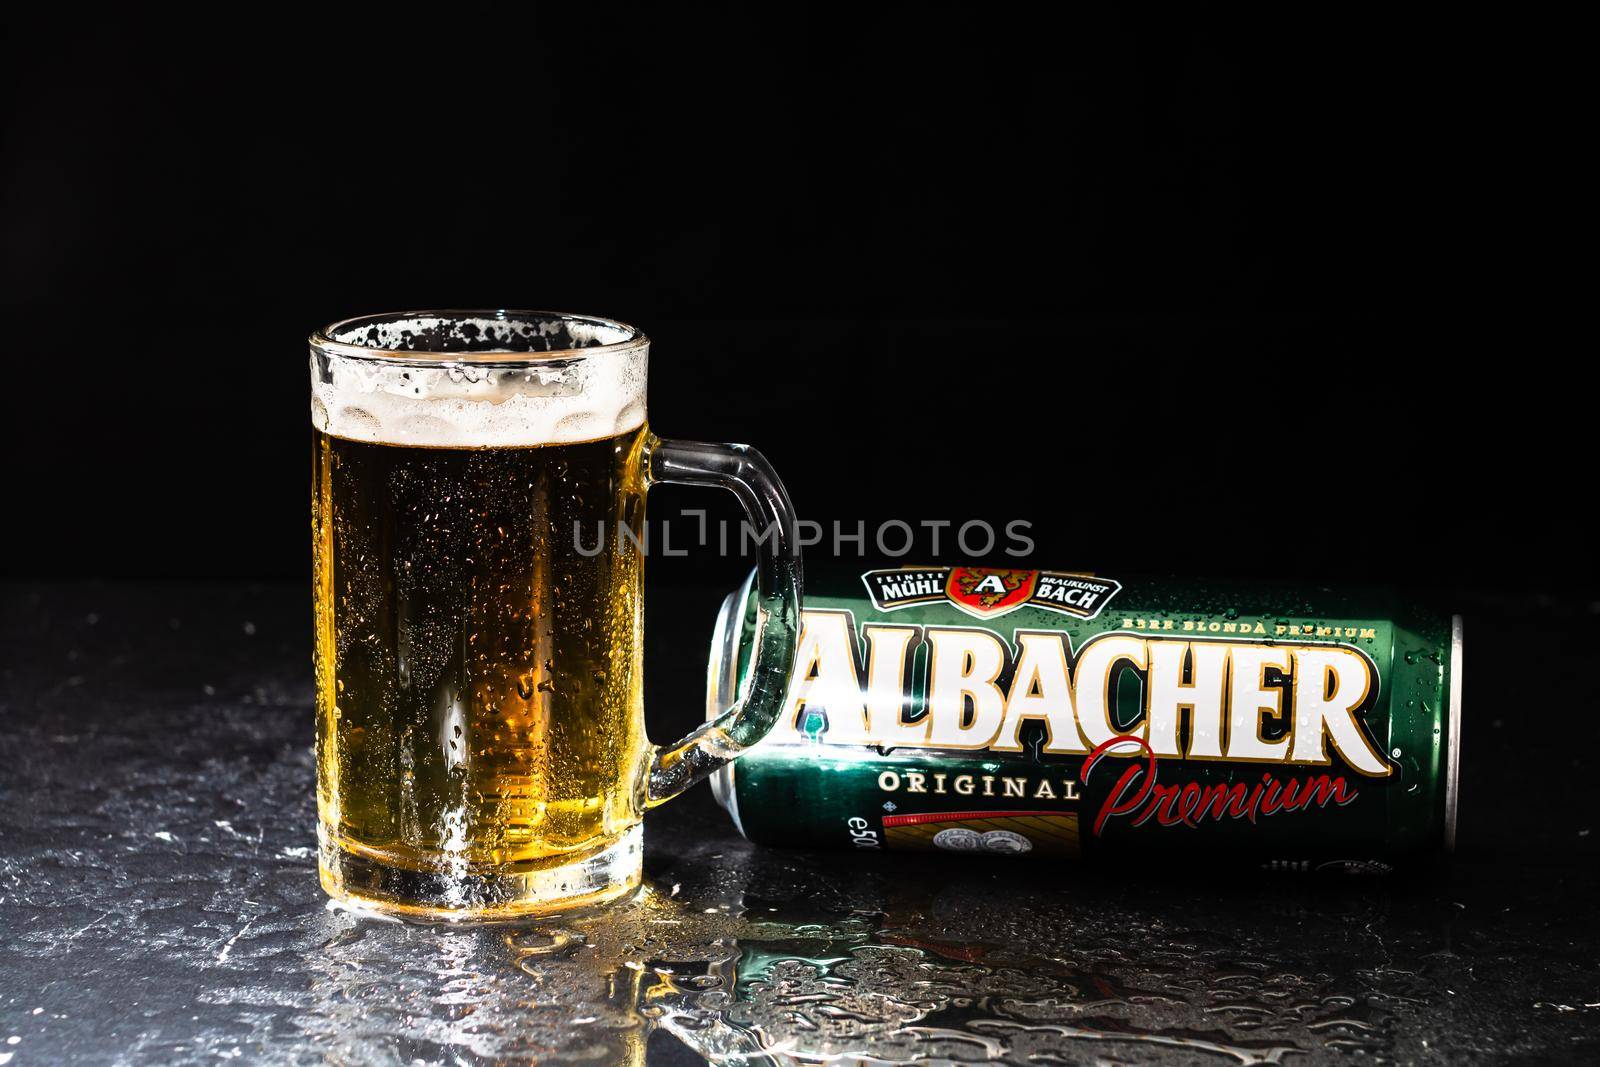 Can of Albacher beer and beer glass on dark background. Illustrative editorial photo shot in Bucharest, Romania, 2021 by vladispas